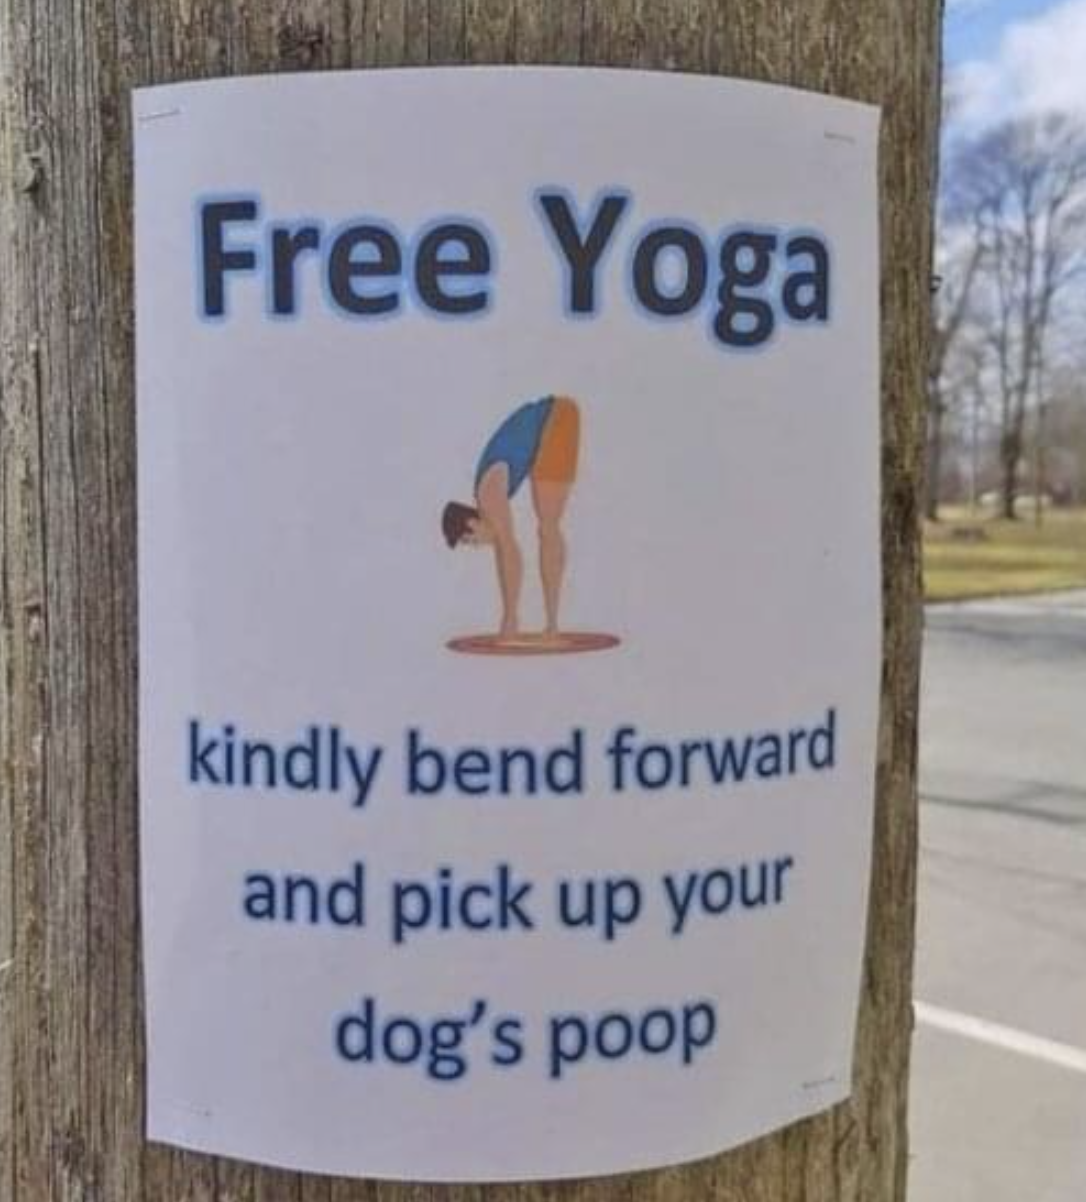 &quot;Kindly bend forward and pick up your dog&#x27;s poop&quot;